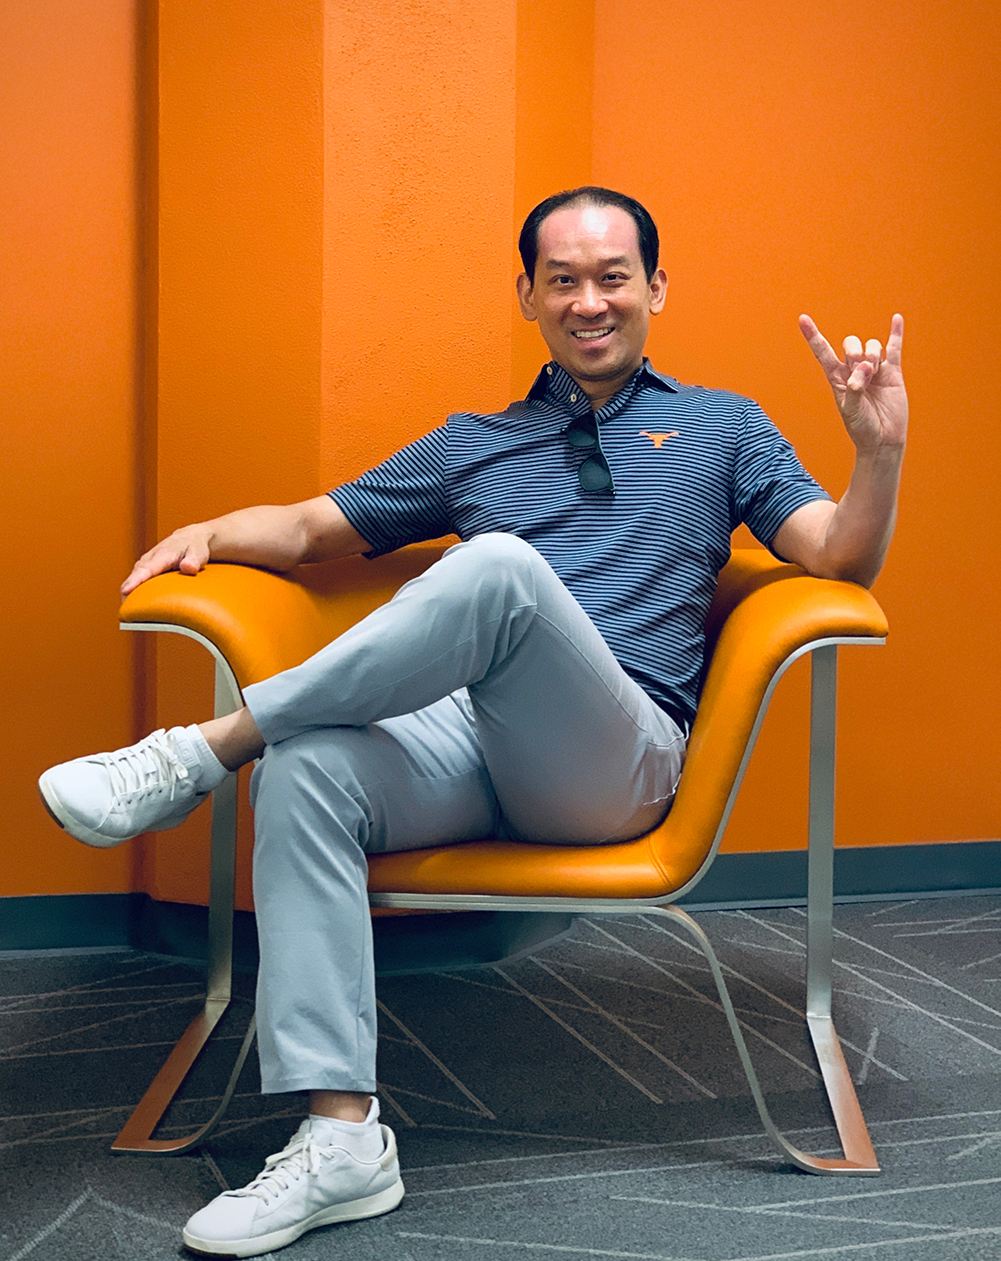 andrew vo poses in a burnt orange room and does a hook em